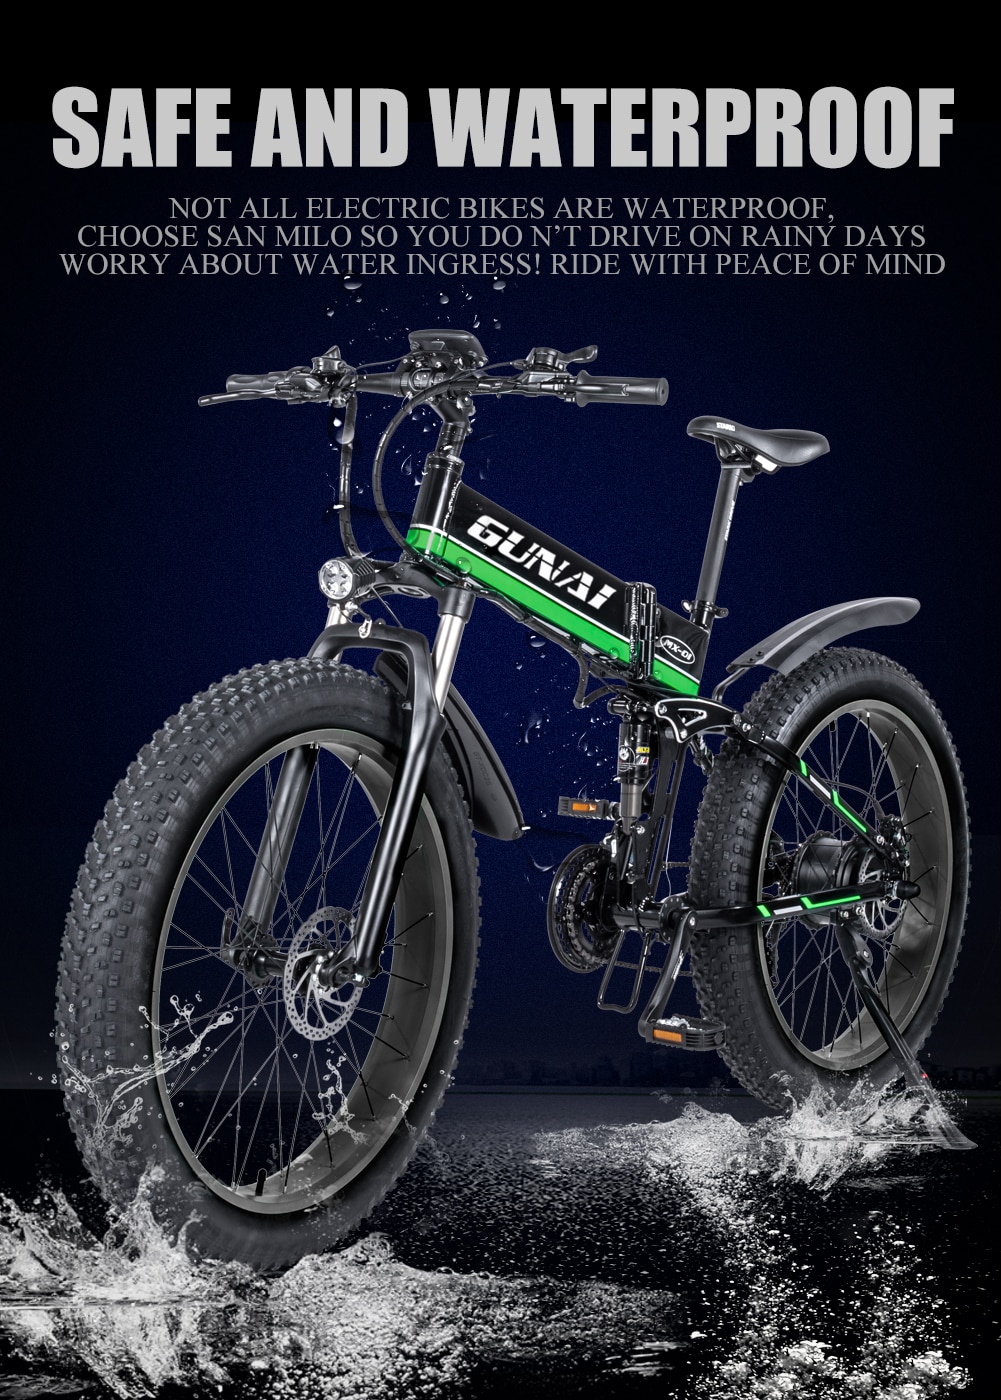 Electric Bike with LCD Display and Removable Lithium Battery